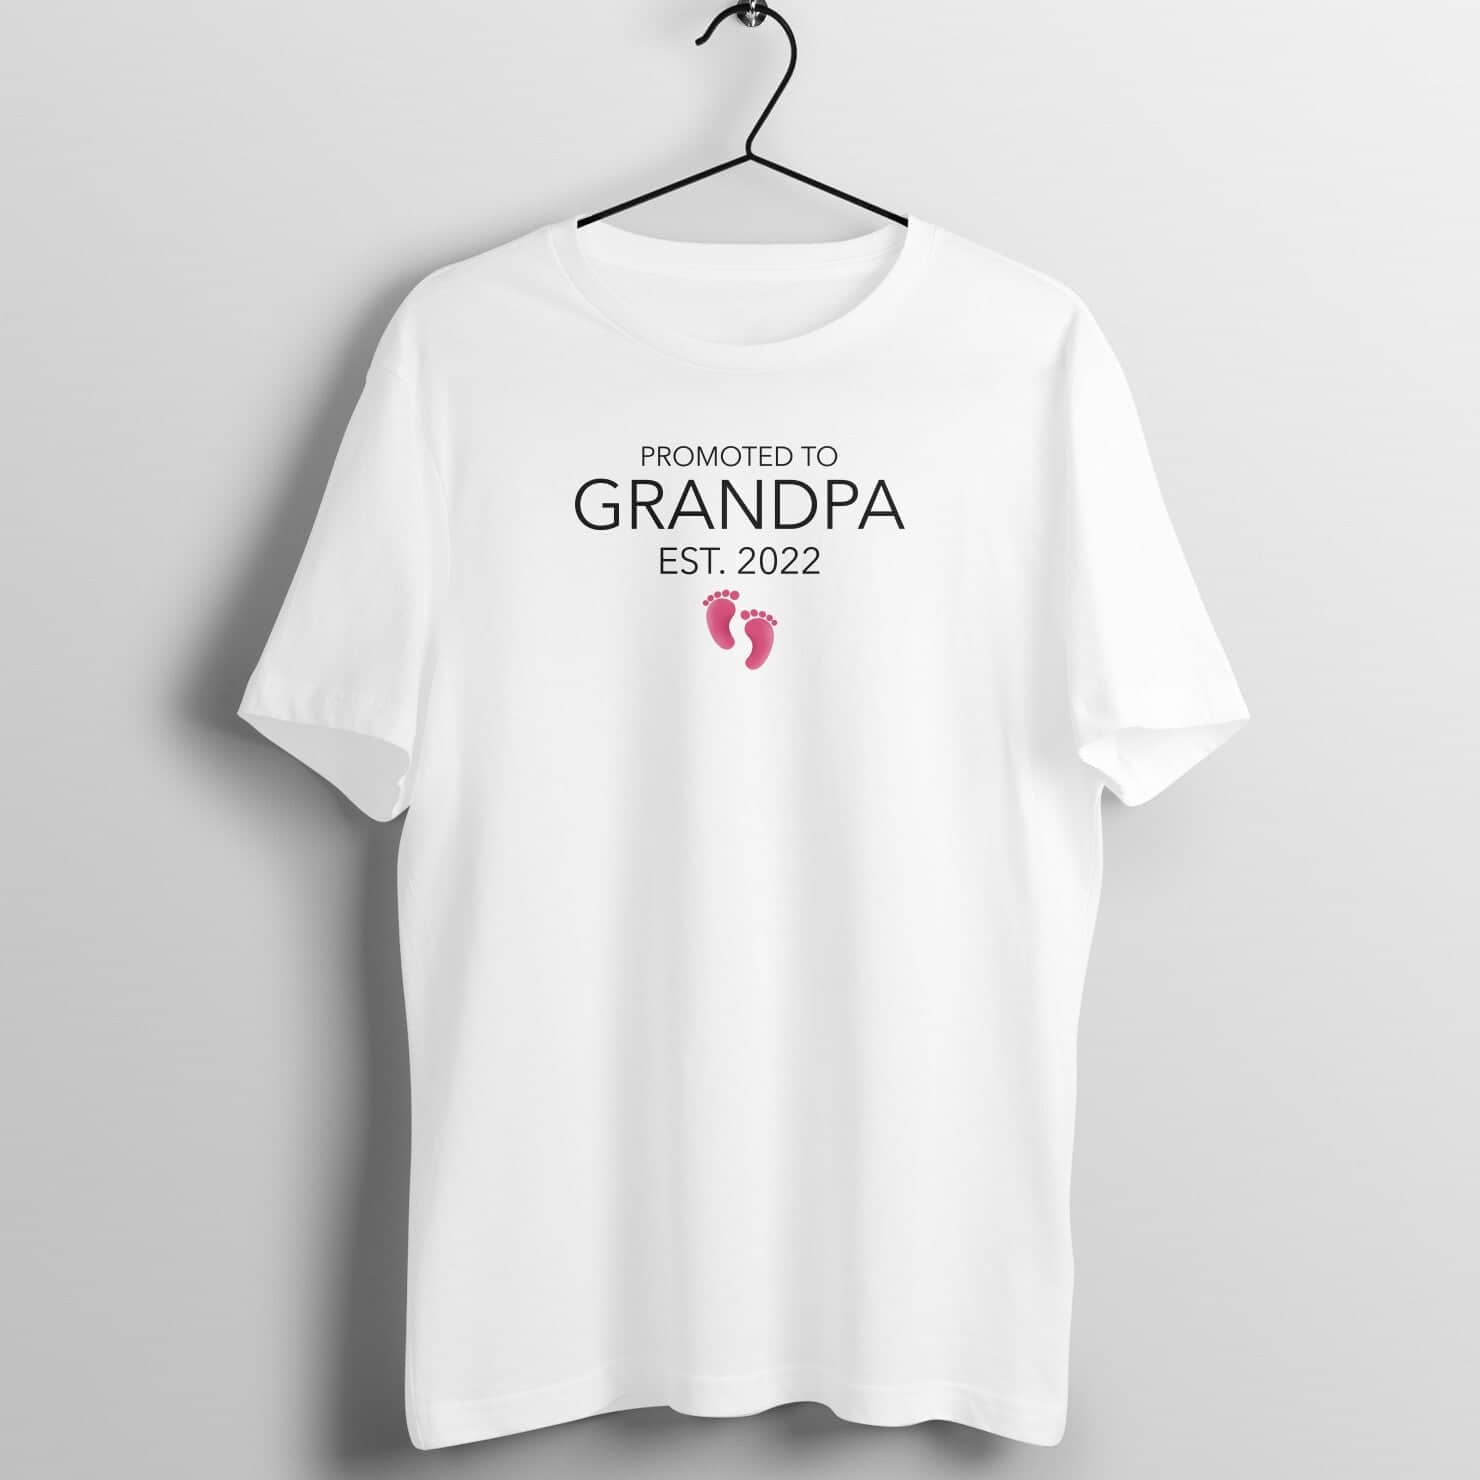 Promoted to Grandpa Est. 2022 Special White T Shirt for Men Shirts & Tops Printrove White S 